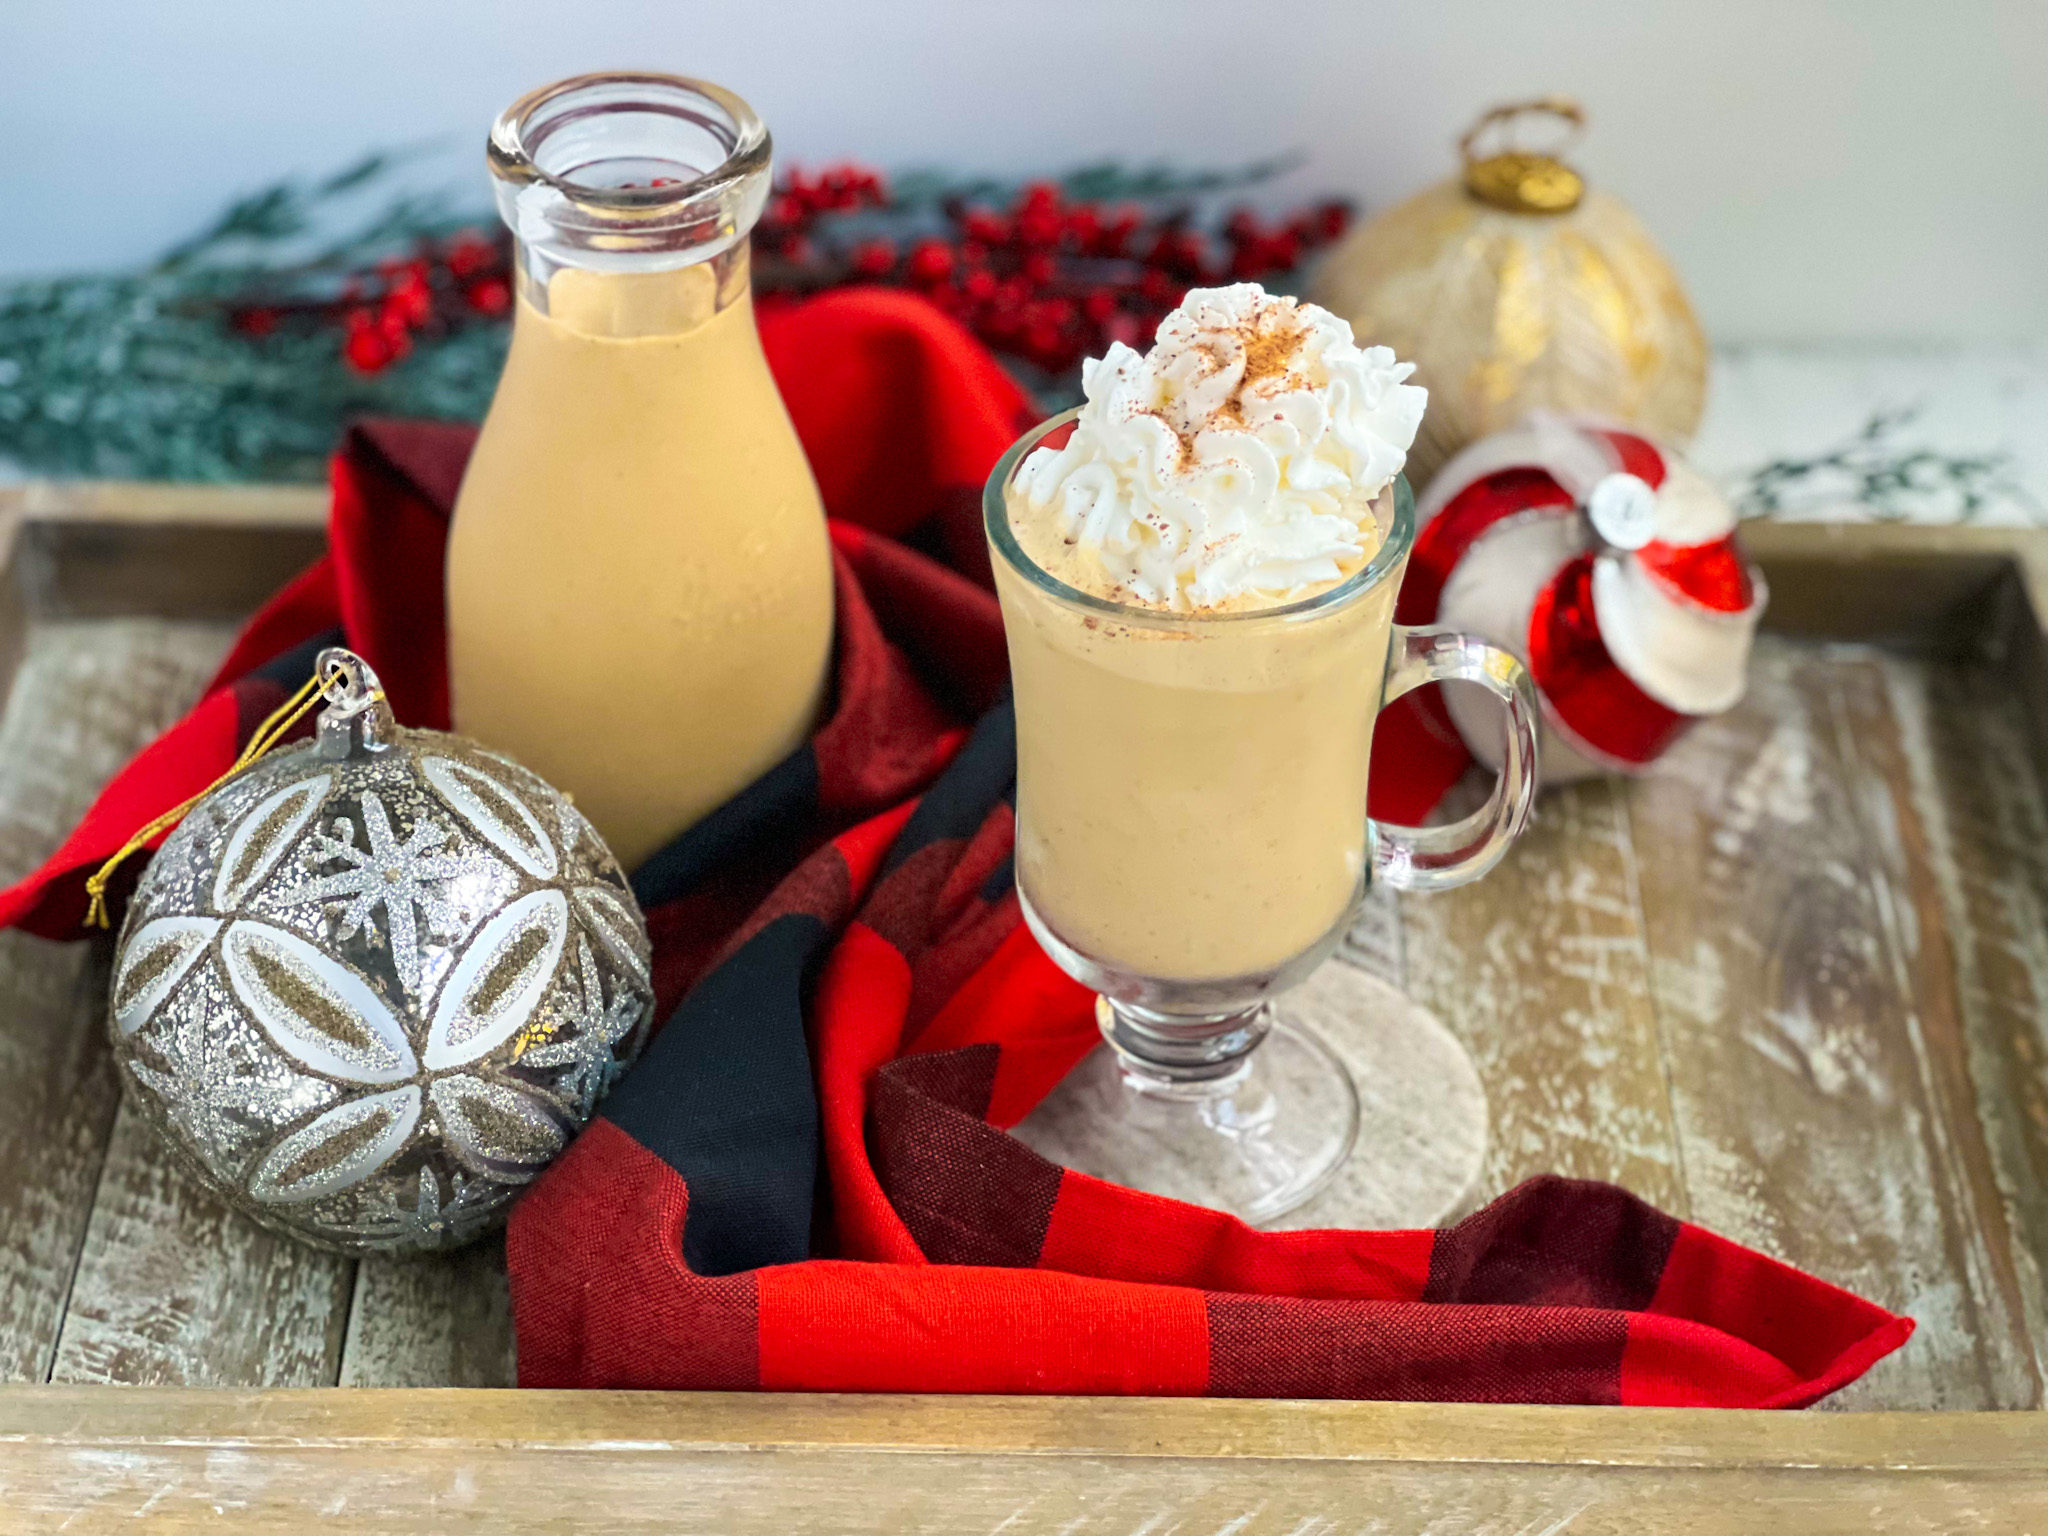 Gingerbread eggnog with whipped cream and nutmeg in a glass with ornaments and a black and red napkin